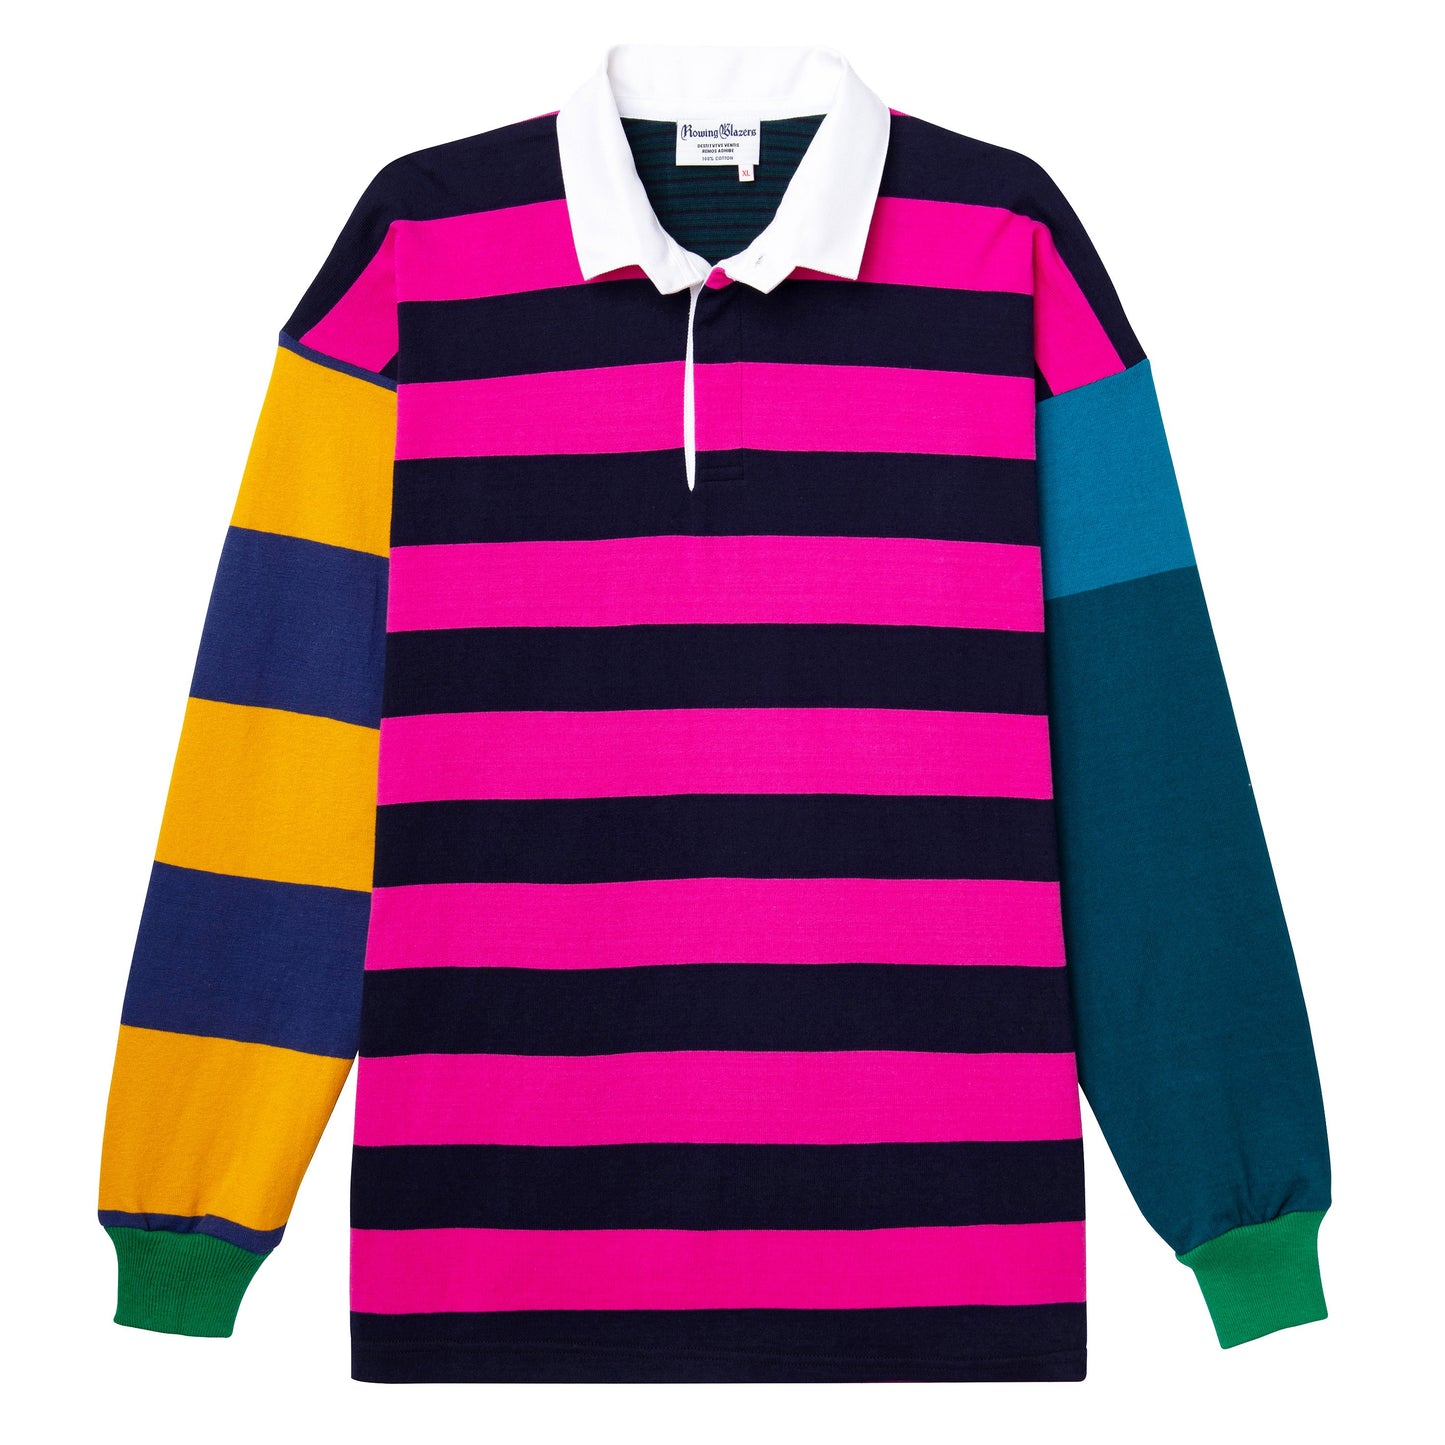 One-of-one striped rugby shirt made from leftover fabric. Hot pink and black stripes on the body, mismatched sleeves in various colors. Each is unique.